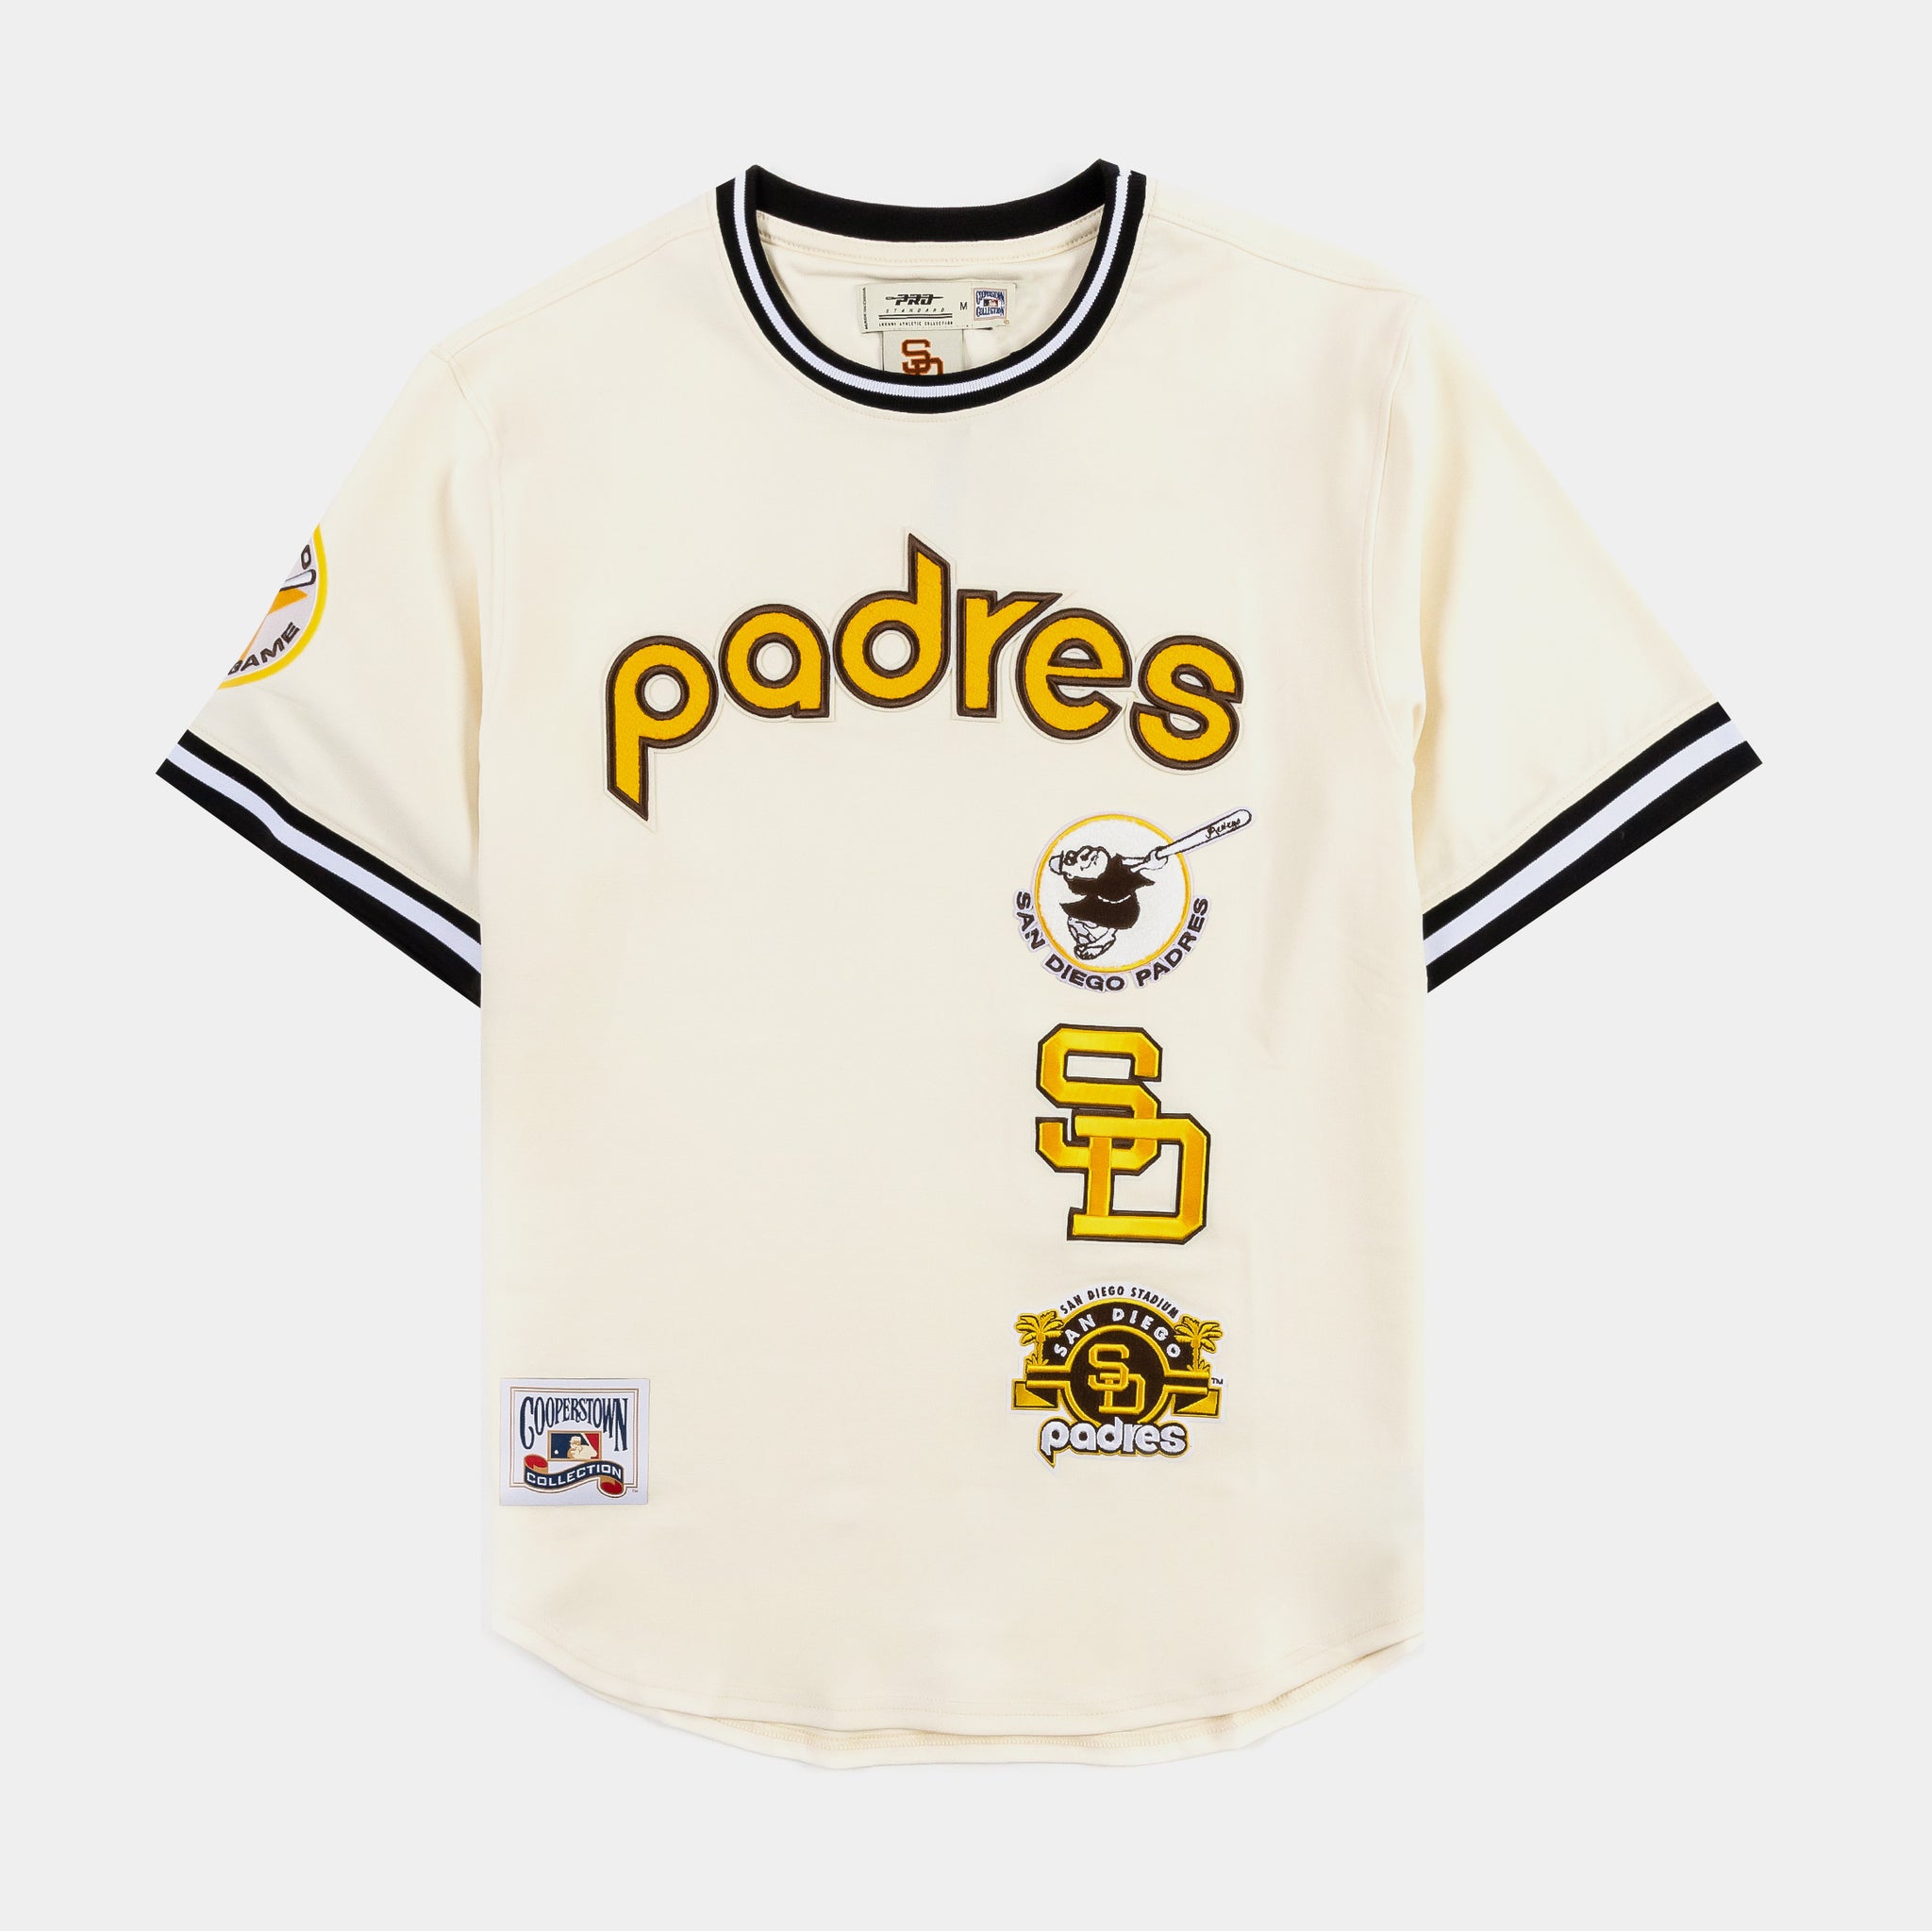 Official San Diego Padres Pro Standard Cooperstown Collection